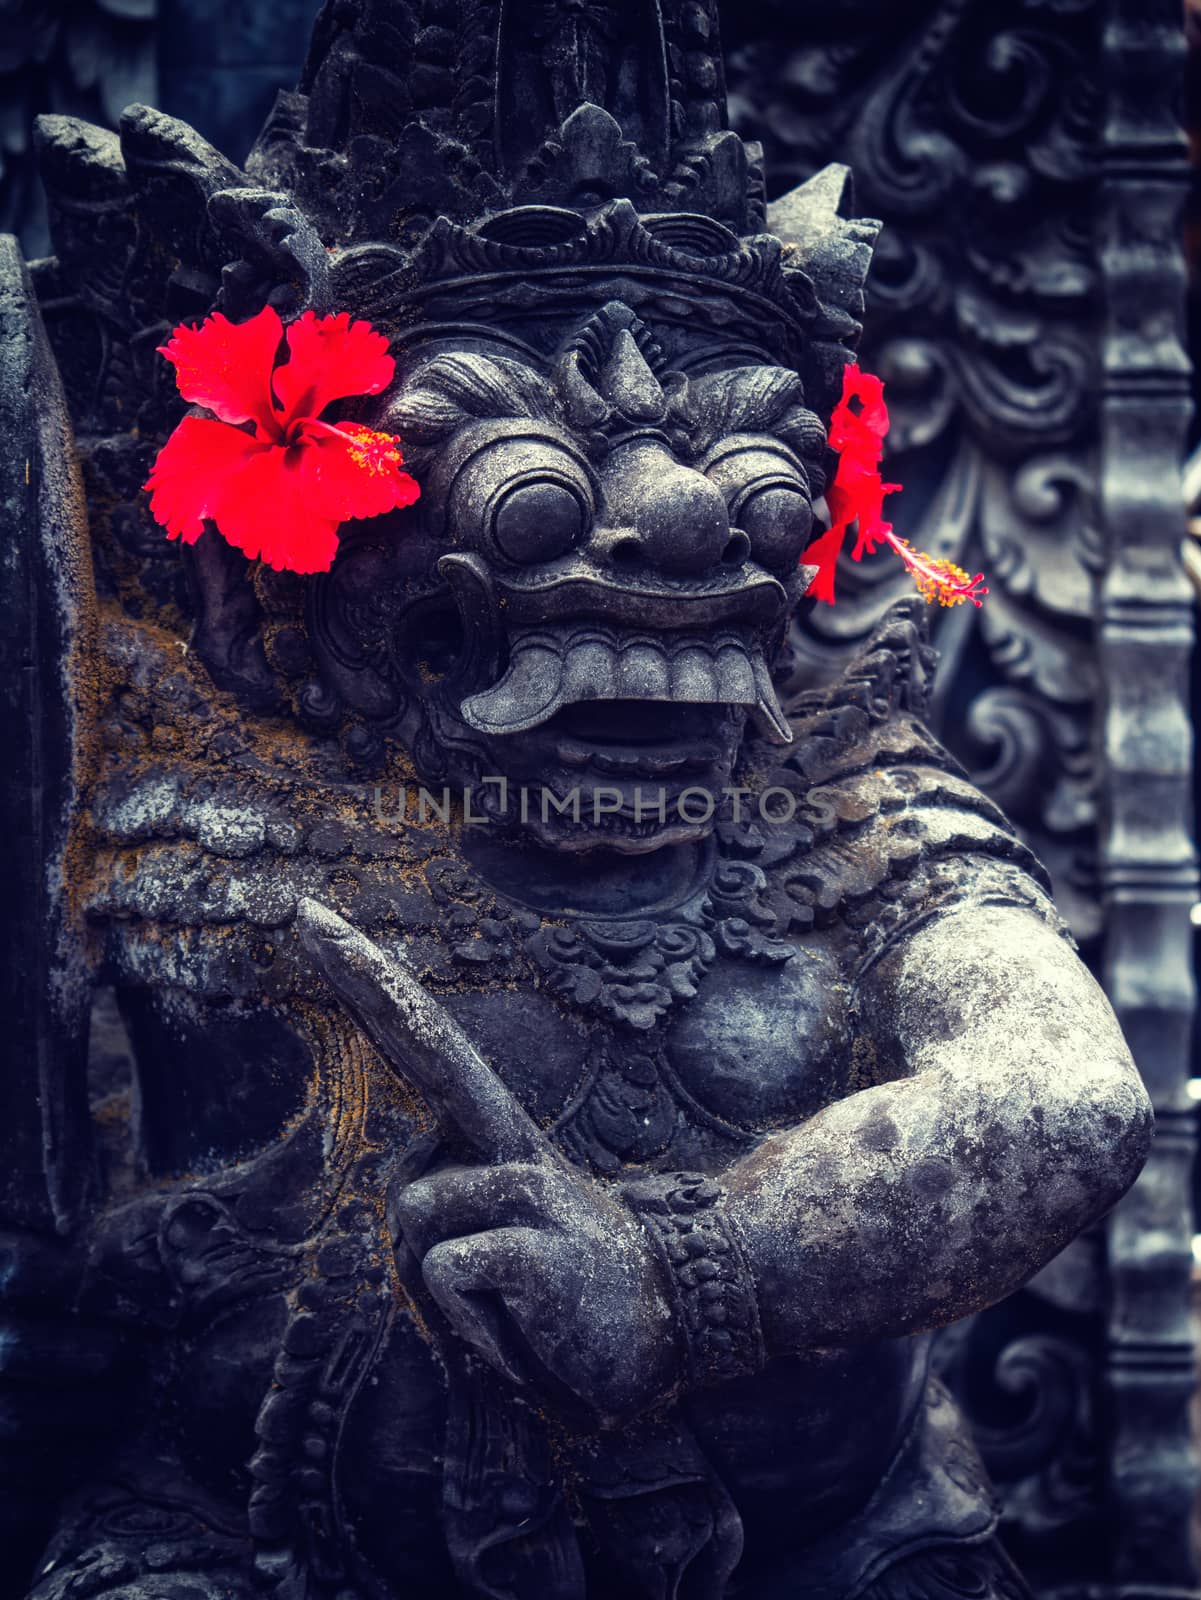 Ancient Balinese statue at the temple in Bali Indonesia